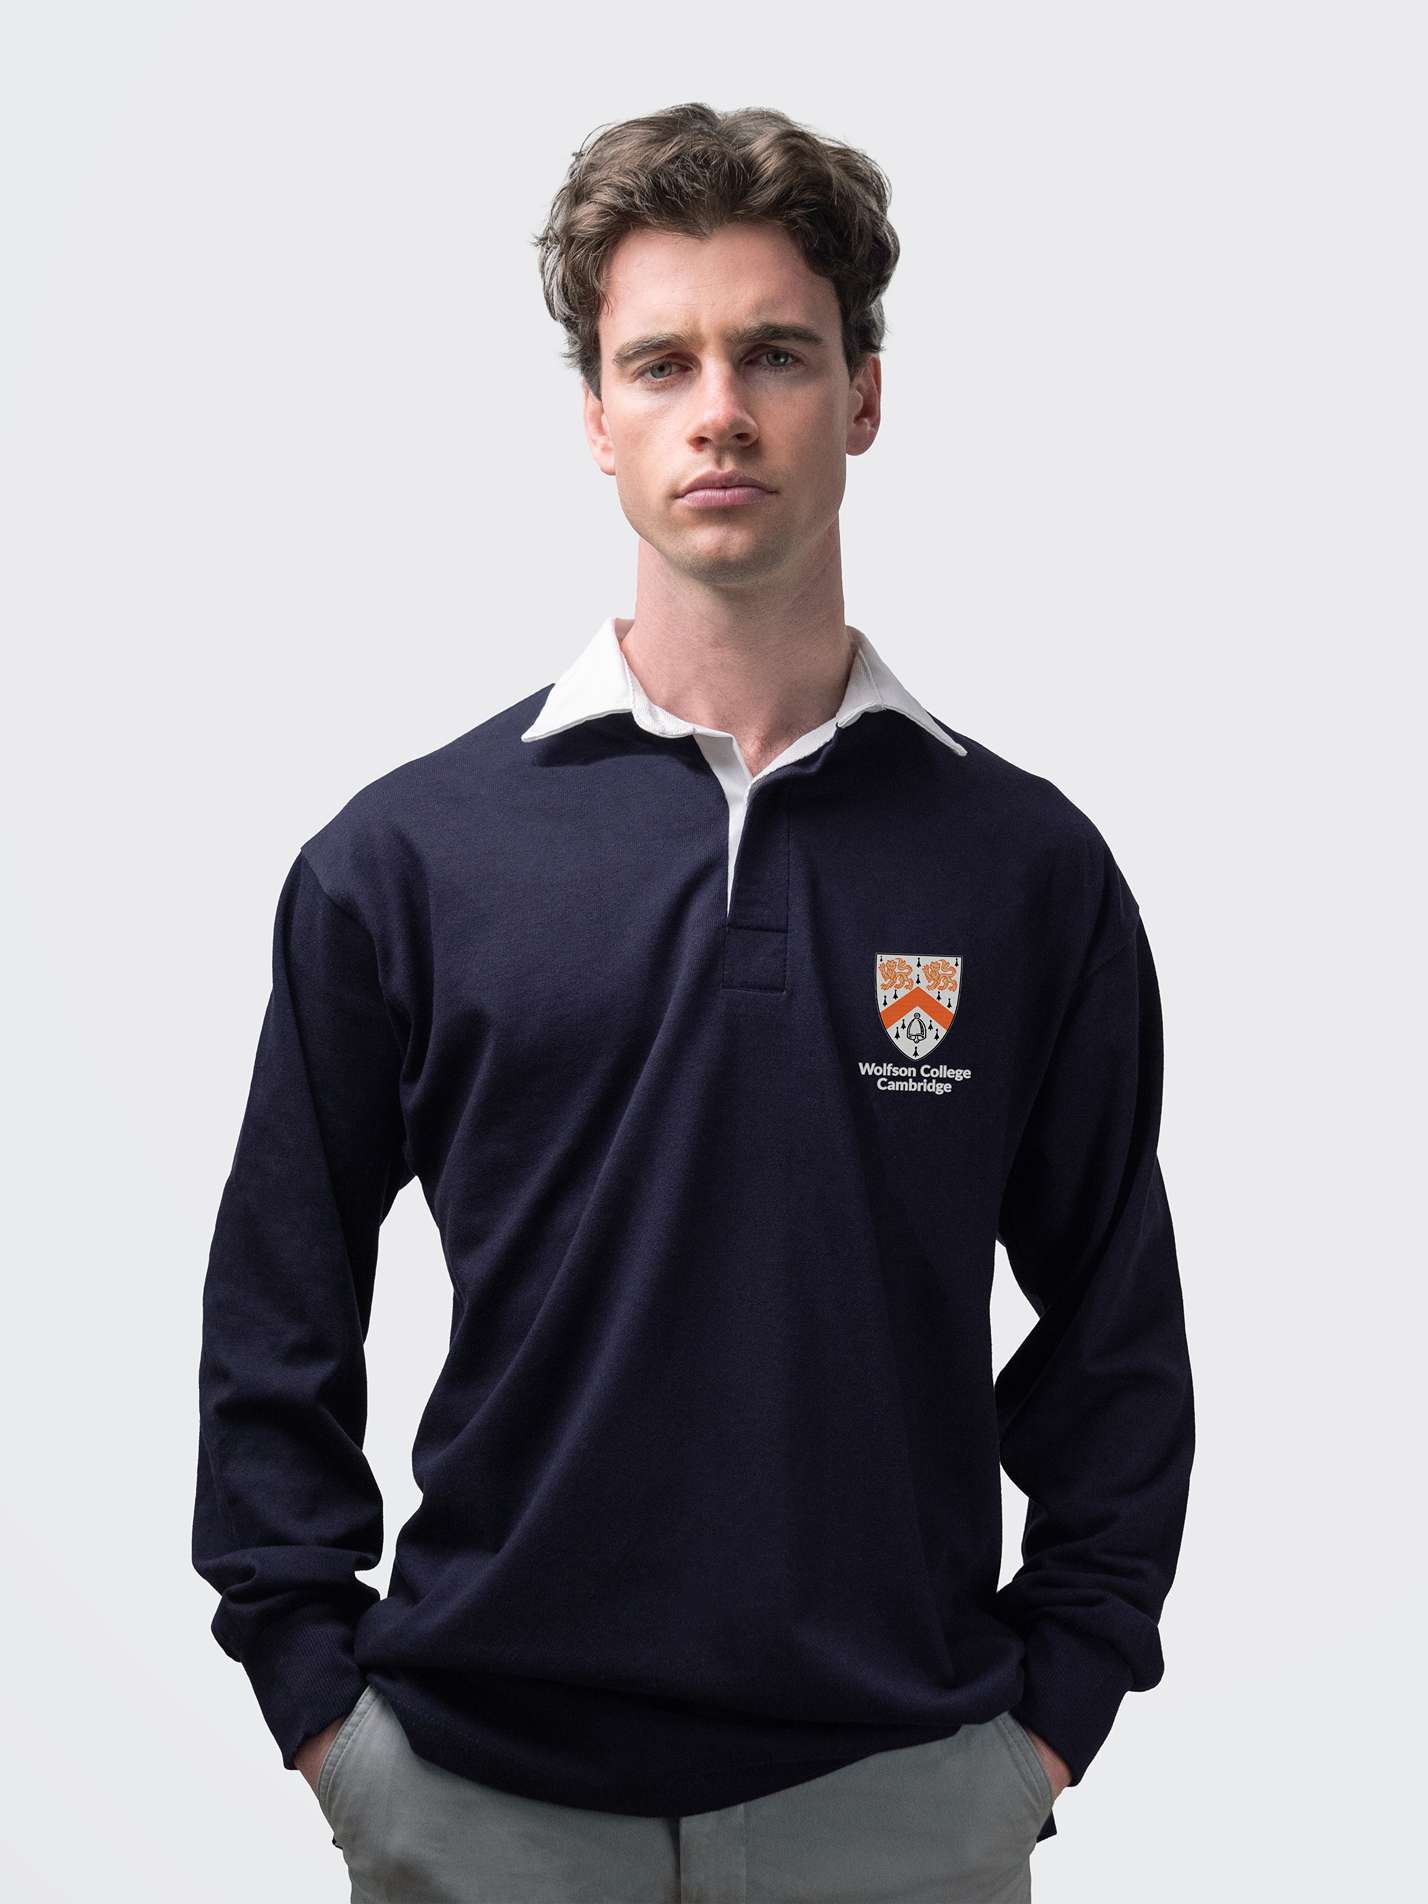 Wolfson student wearing an embroidered mens rugby shirt in navy